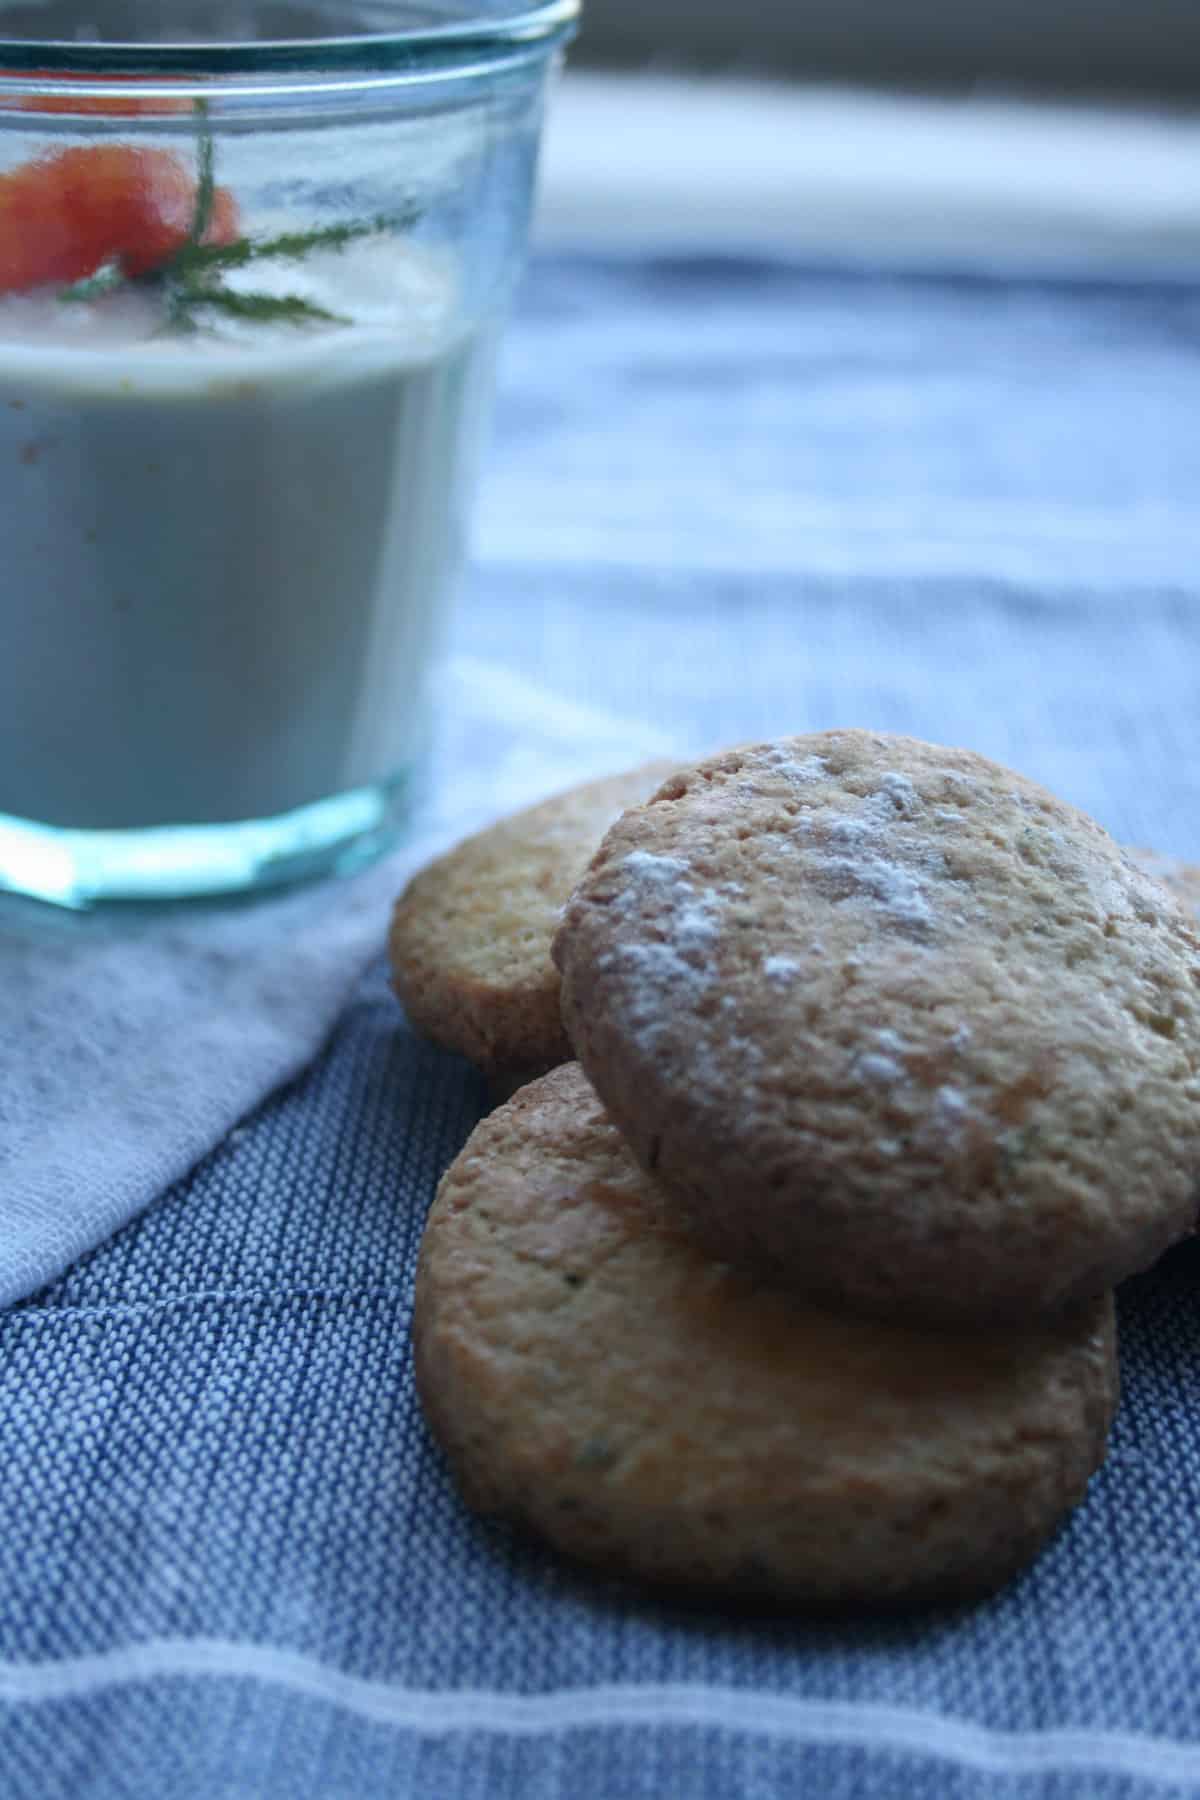 A pile of cookies with orange posset glass in the background.